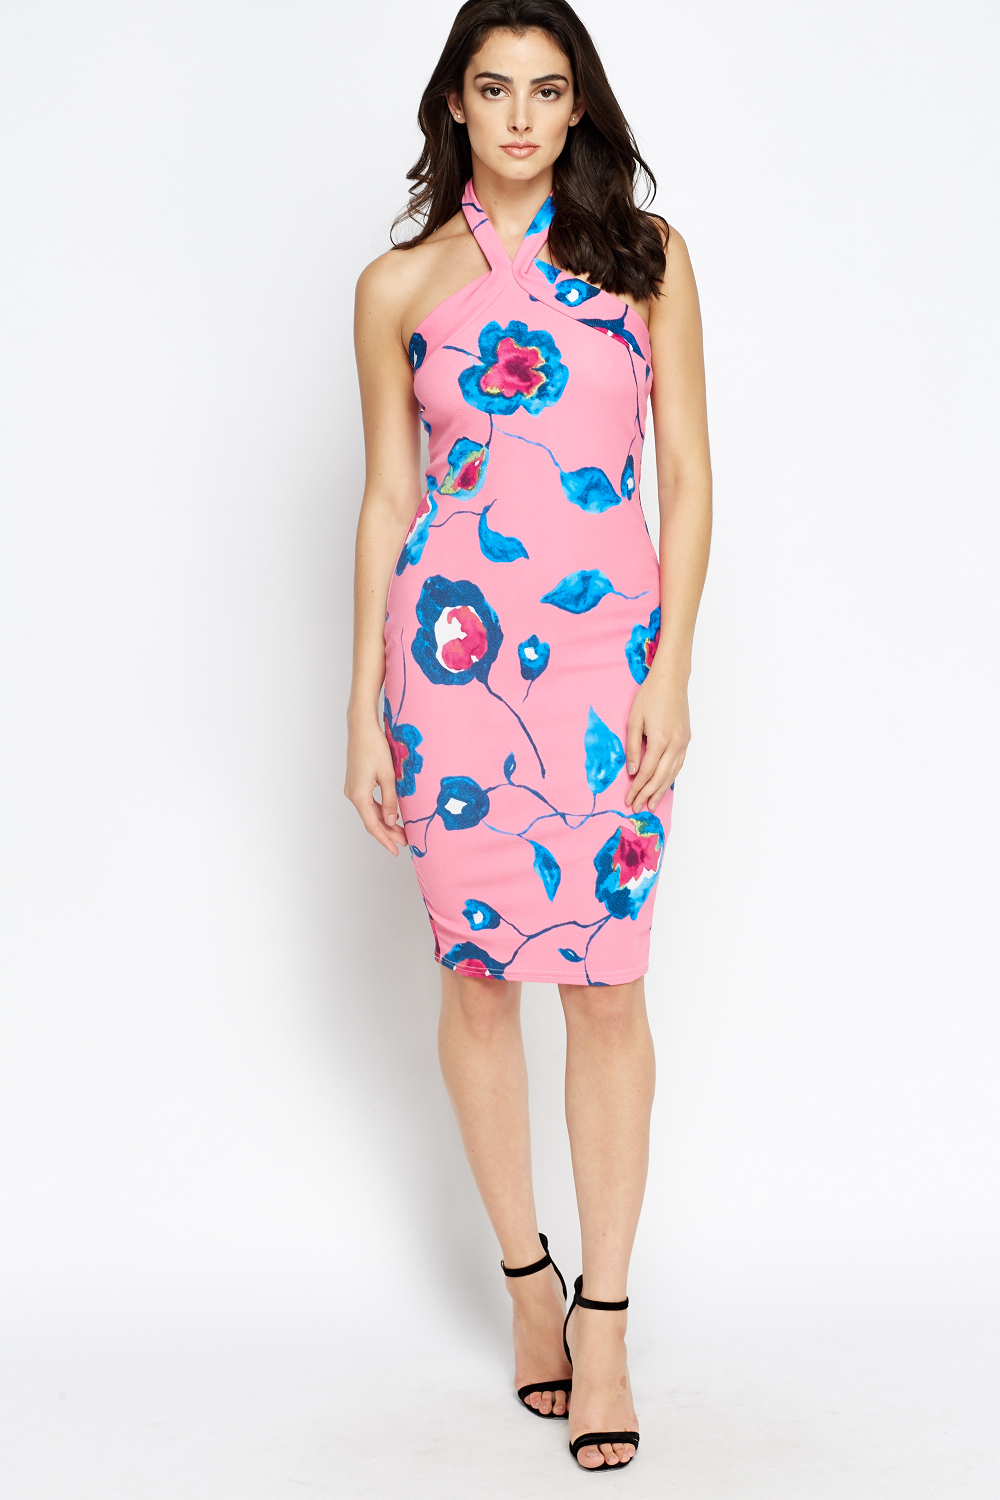 Pink Floral Bodycon Dress - Just $7